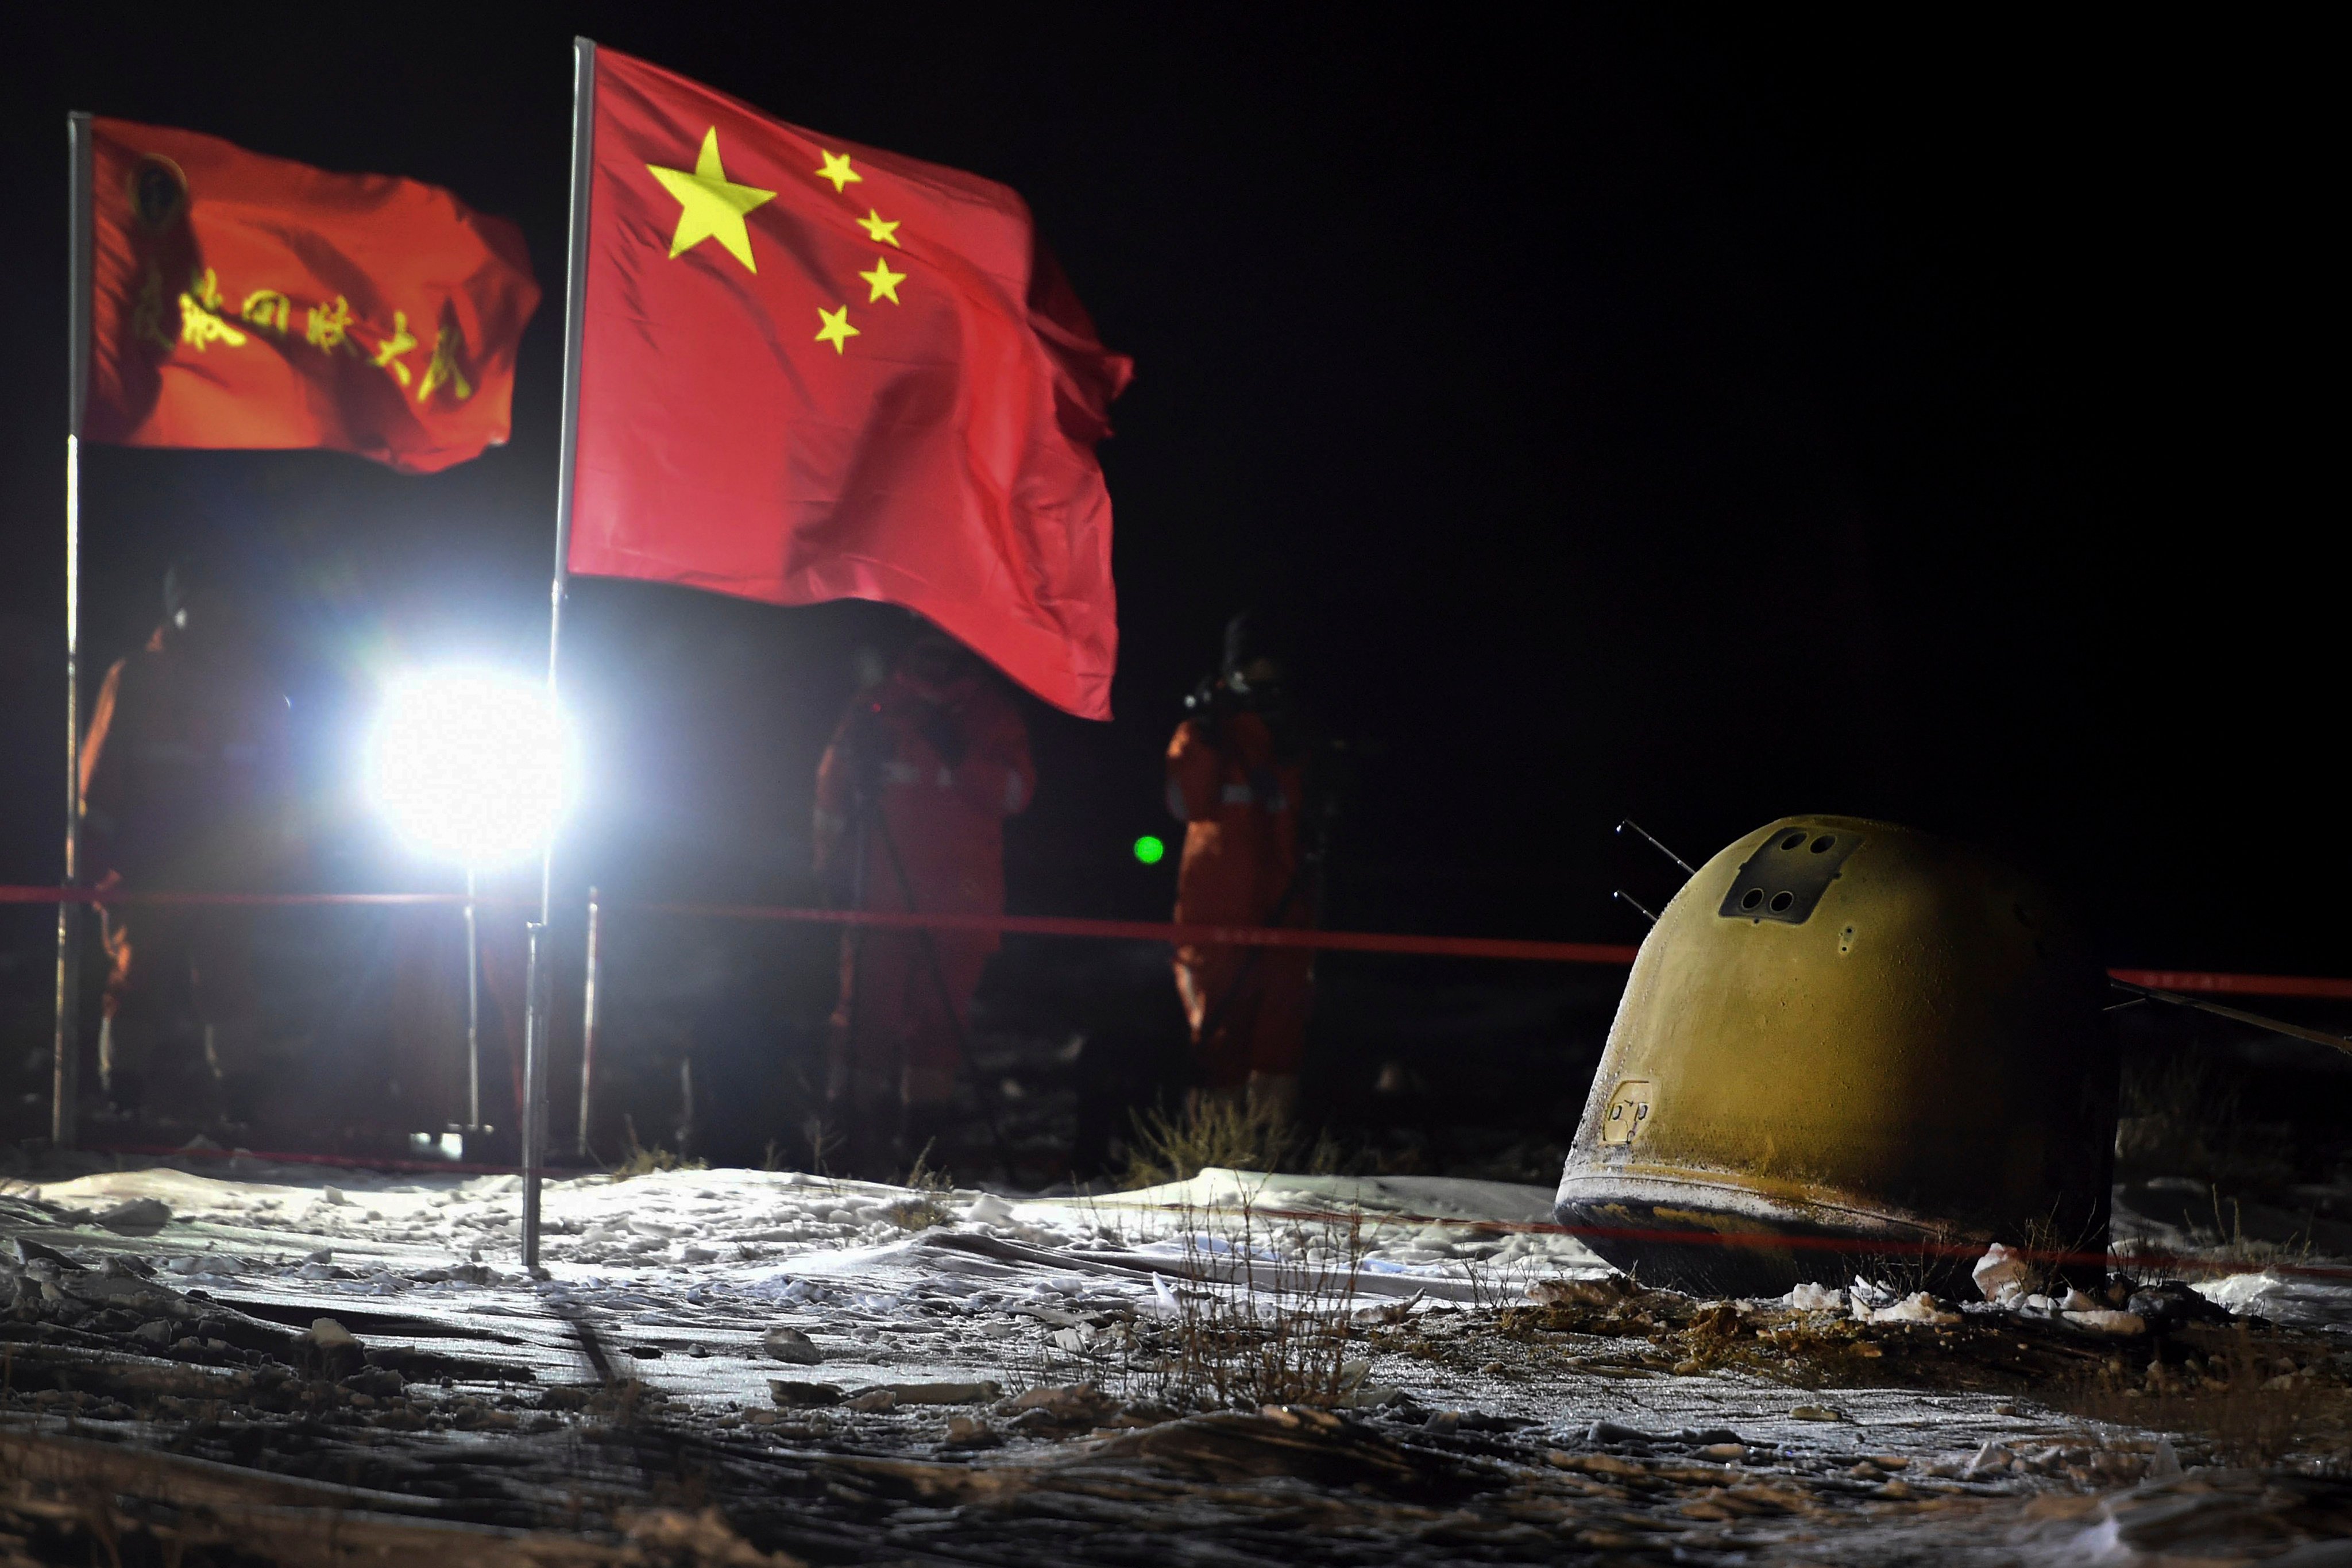 The Chinese moon mission’s Chang’e-5 probe after its successful return to Earth in 2020. Photo: Xinhua